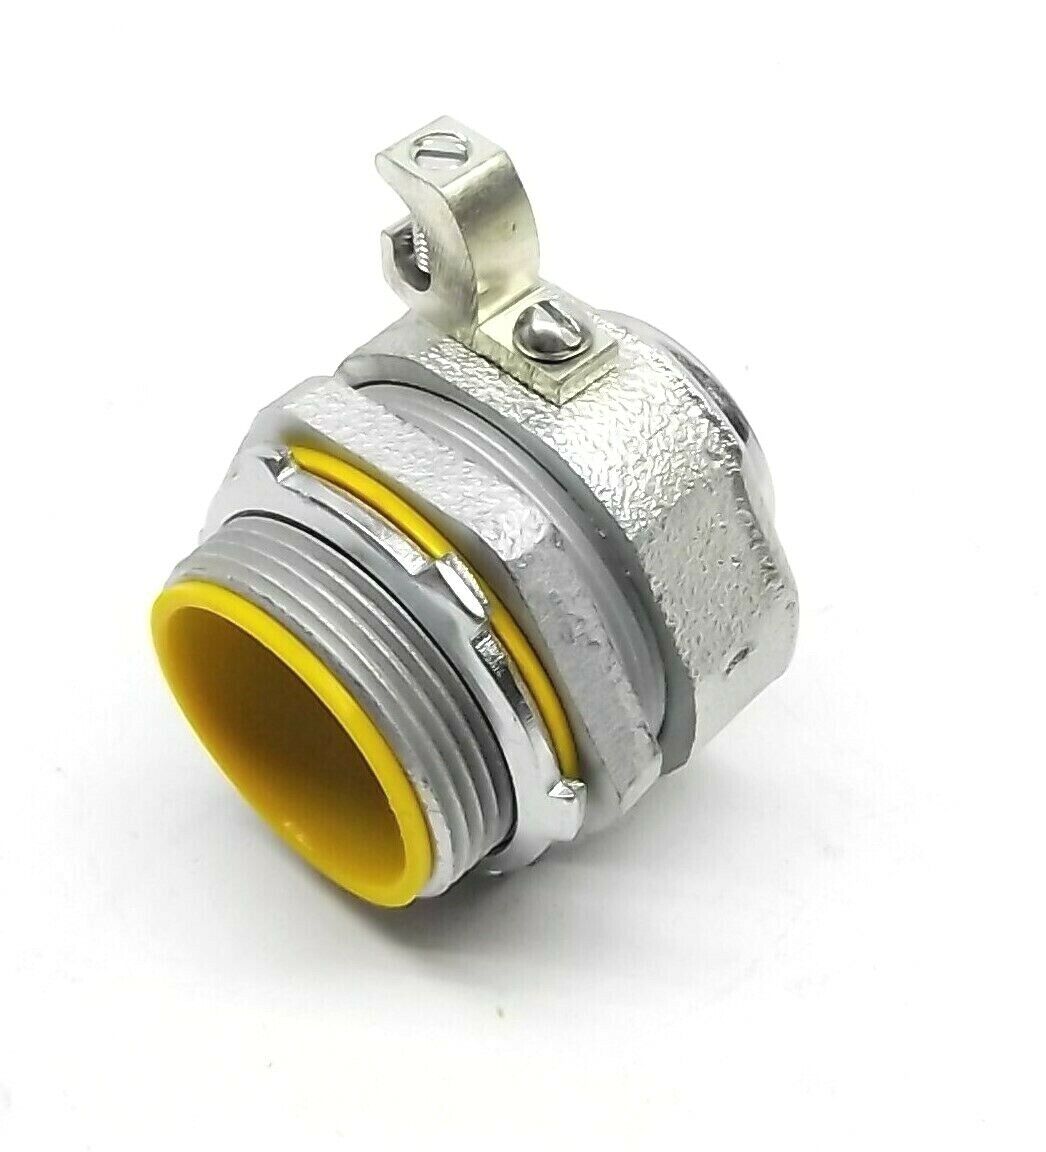 EATON CROUSE-HINDS LTB150G GROUNDING CONNECTOR W/INSULATED THROAT 1-1/2"